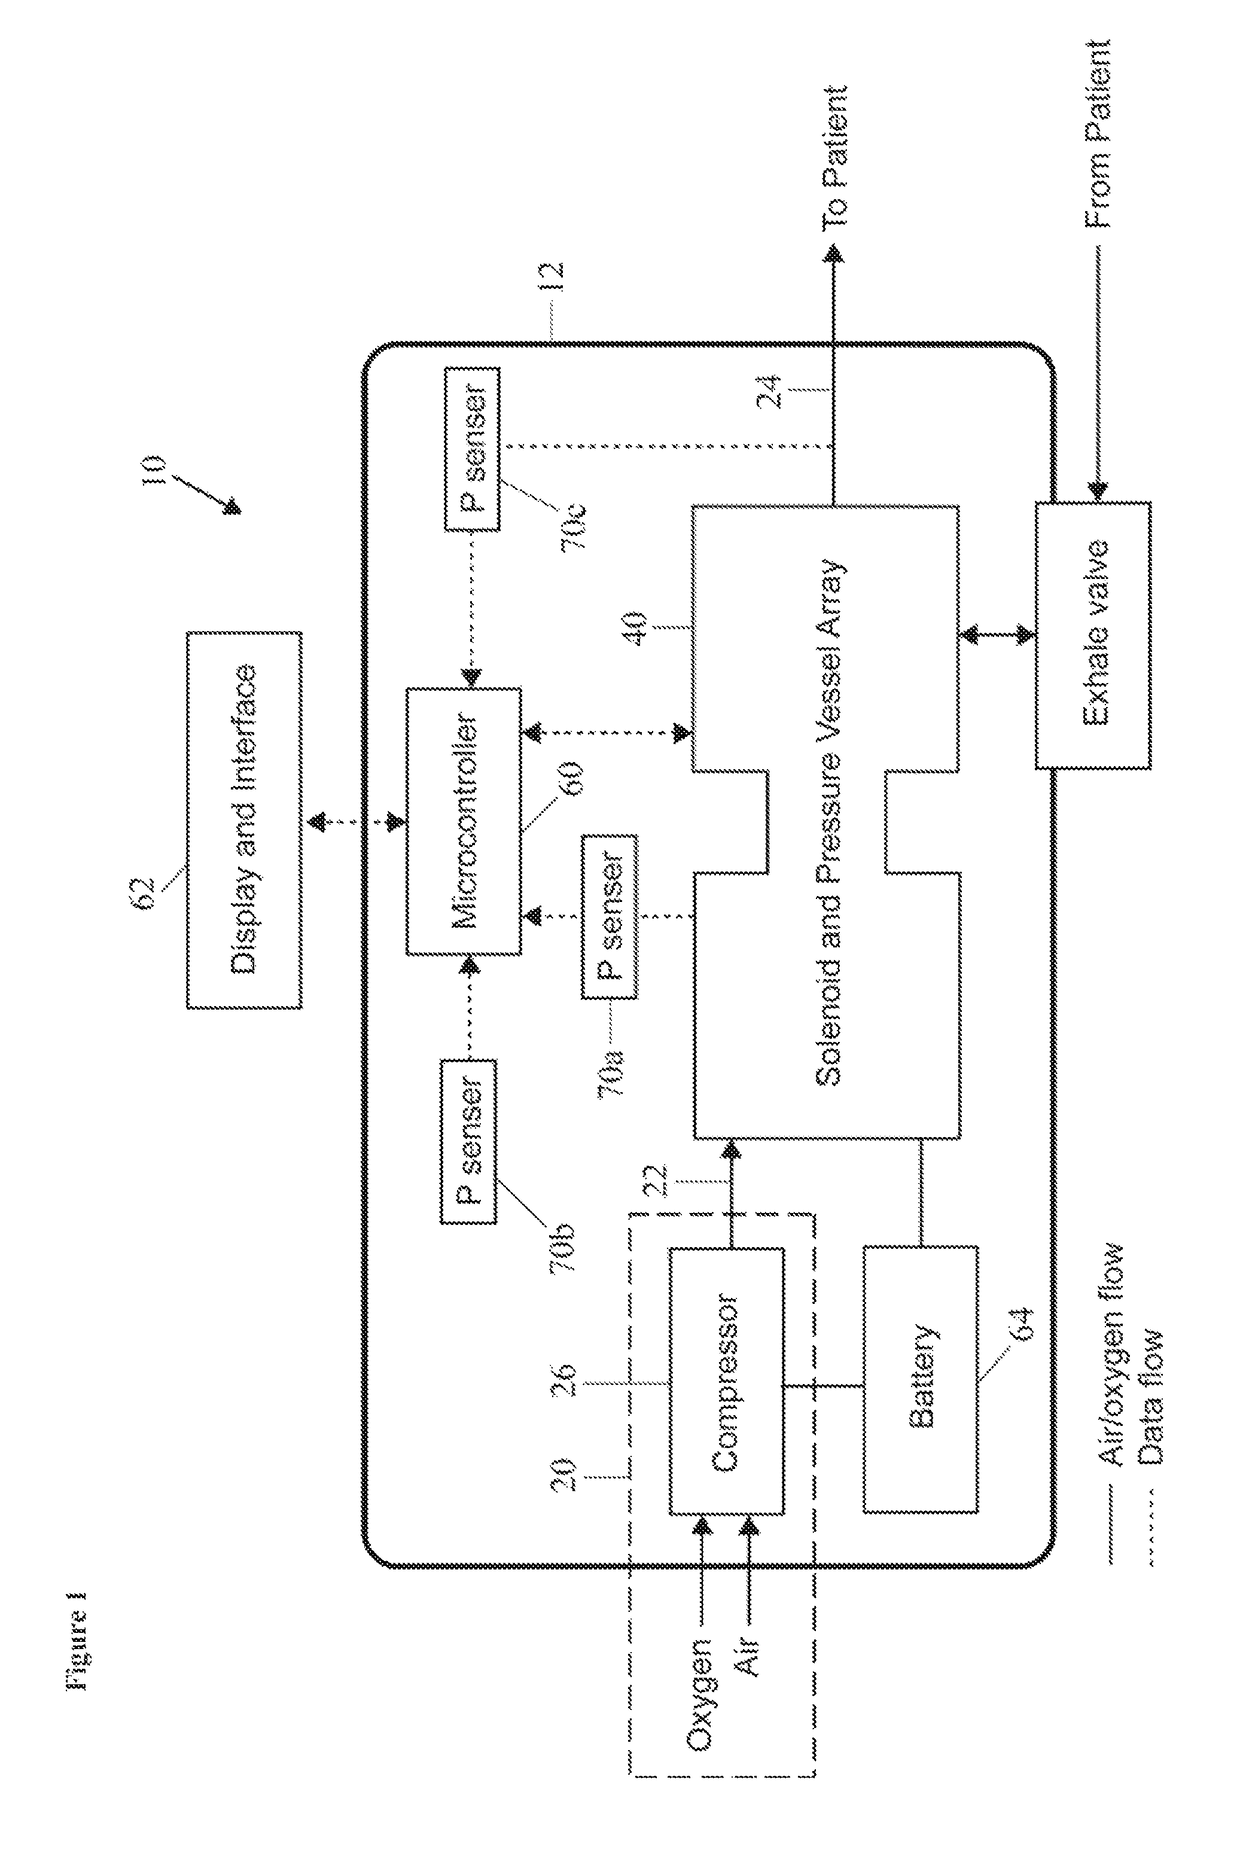 Ventilation systems and methods